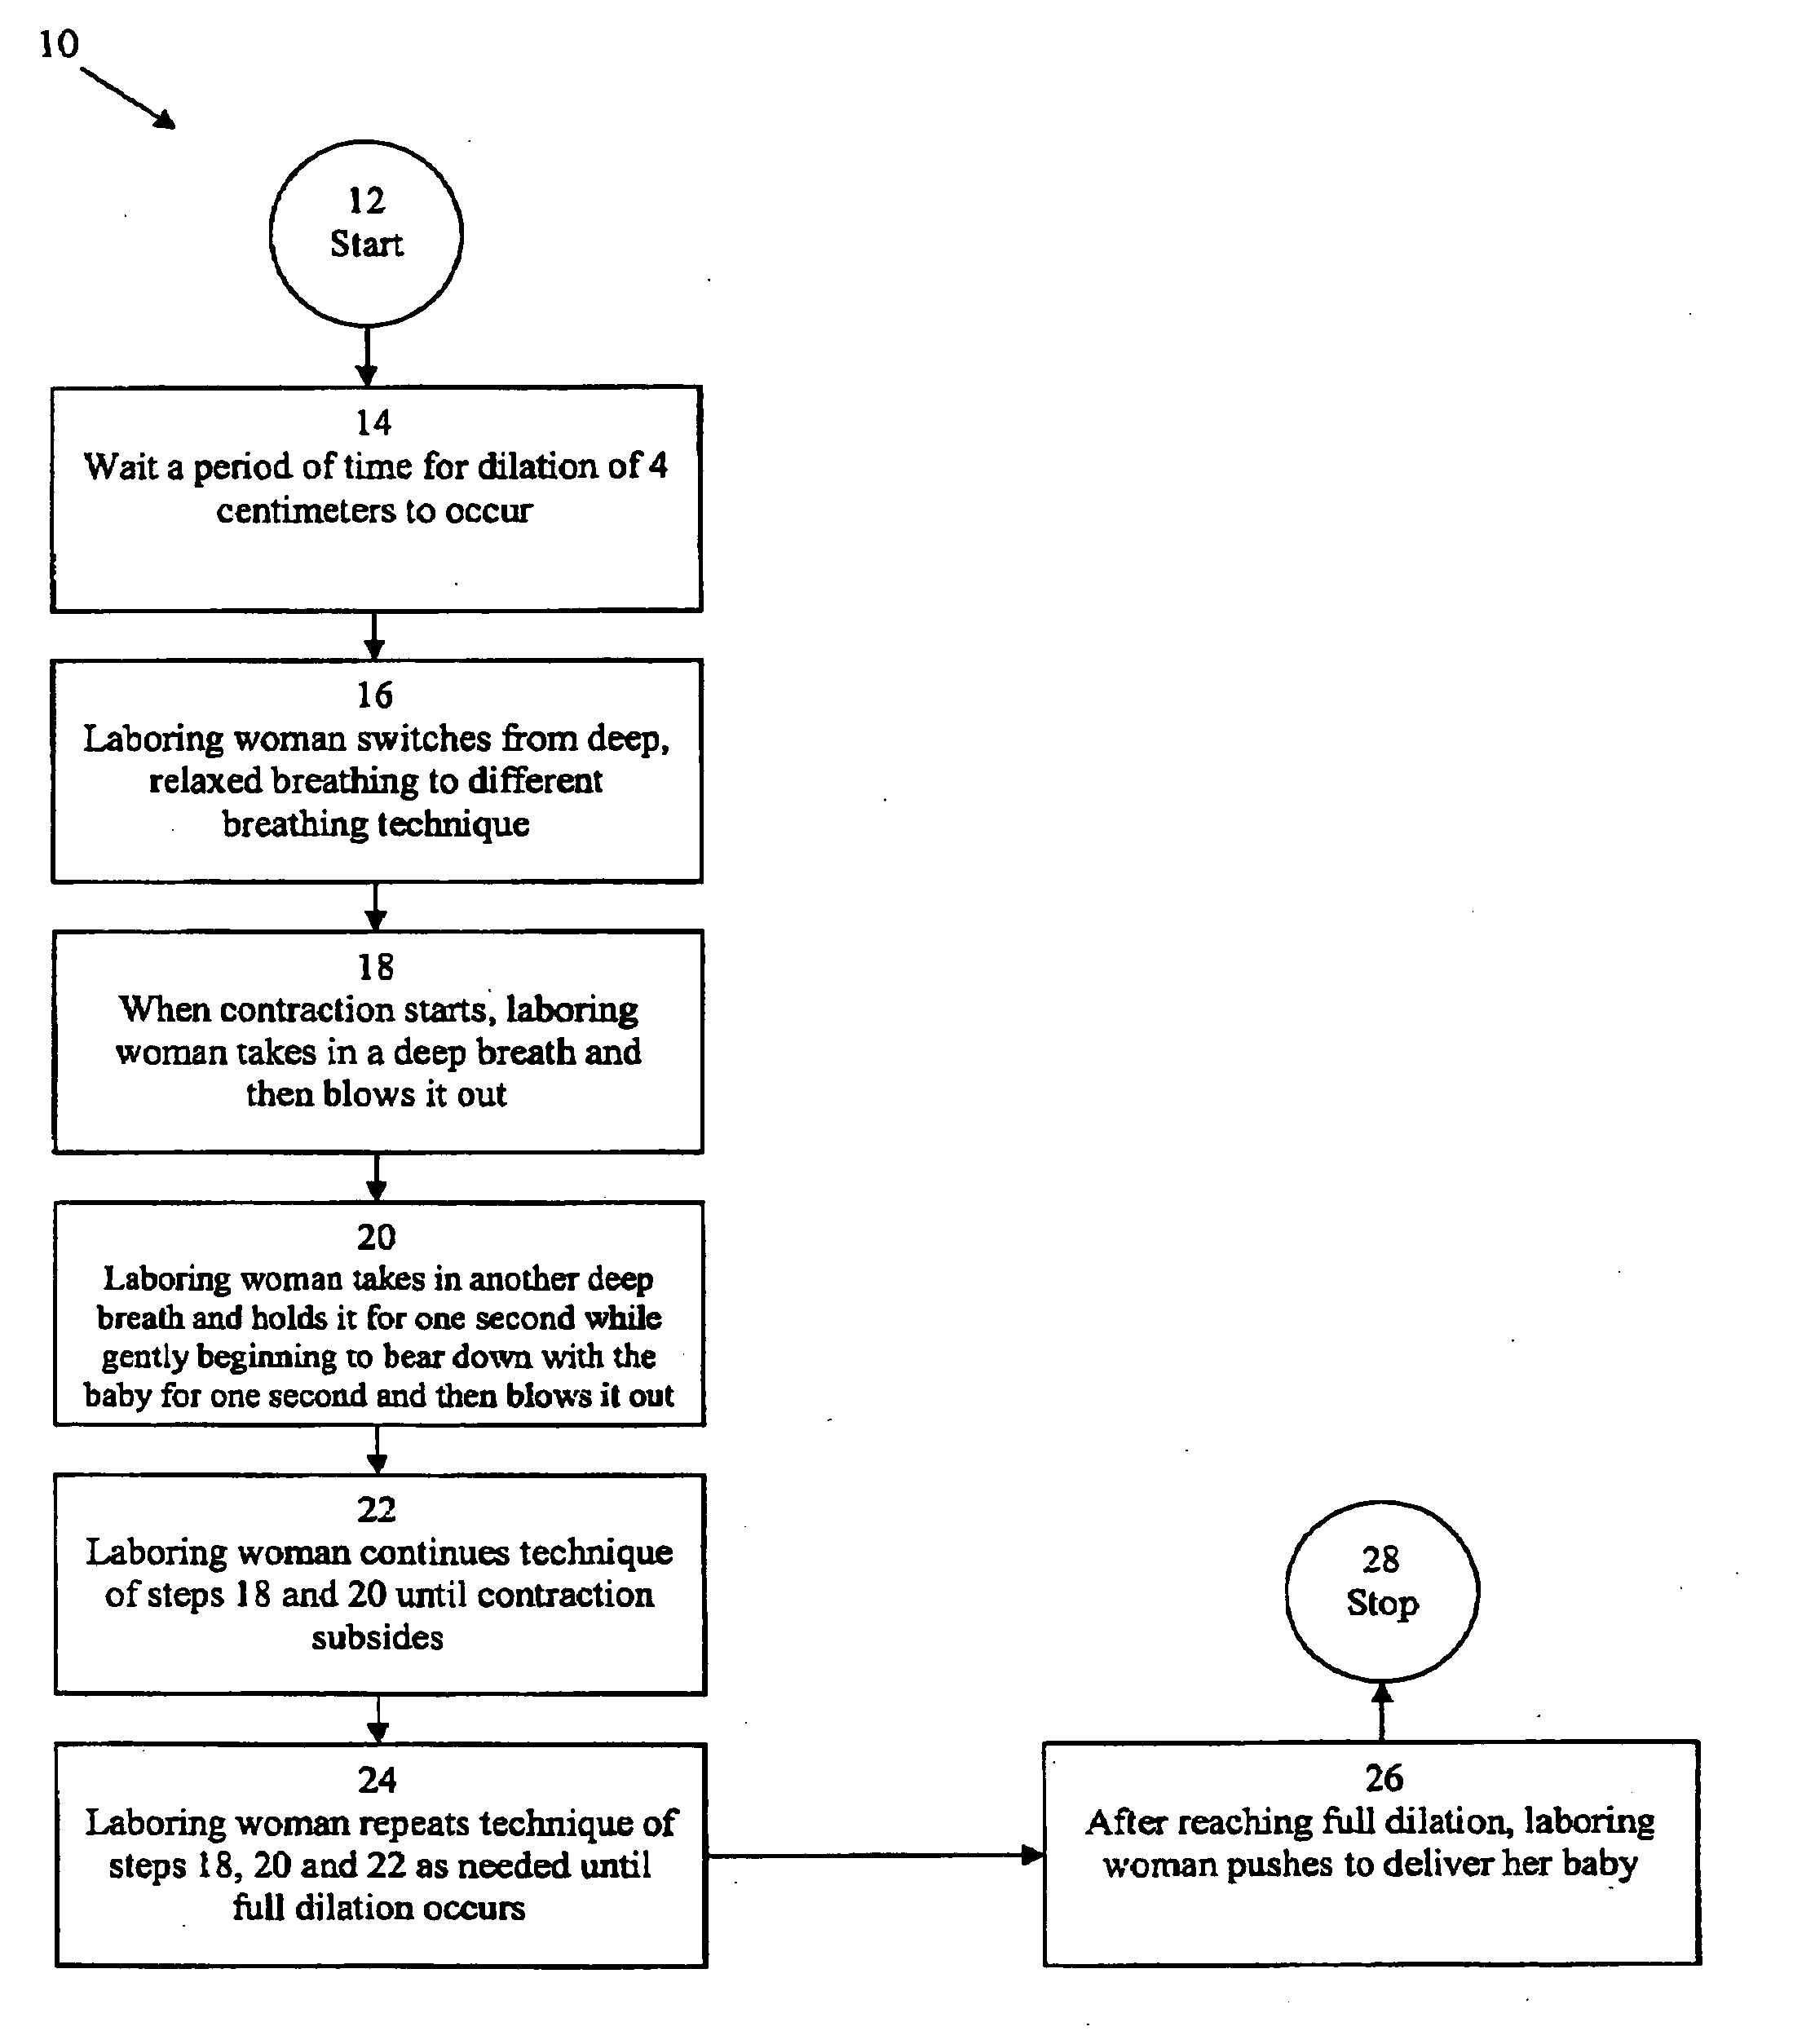 Method for managing labor and childbirth